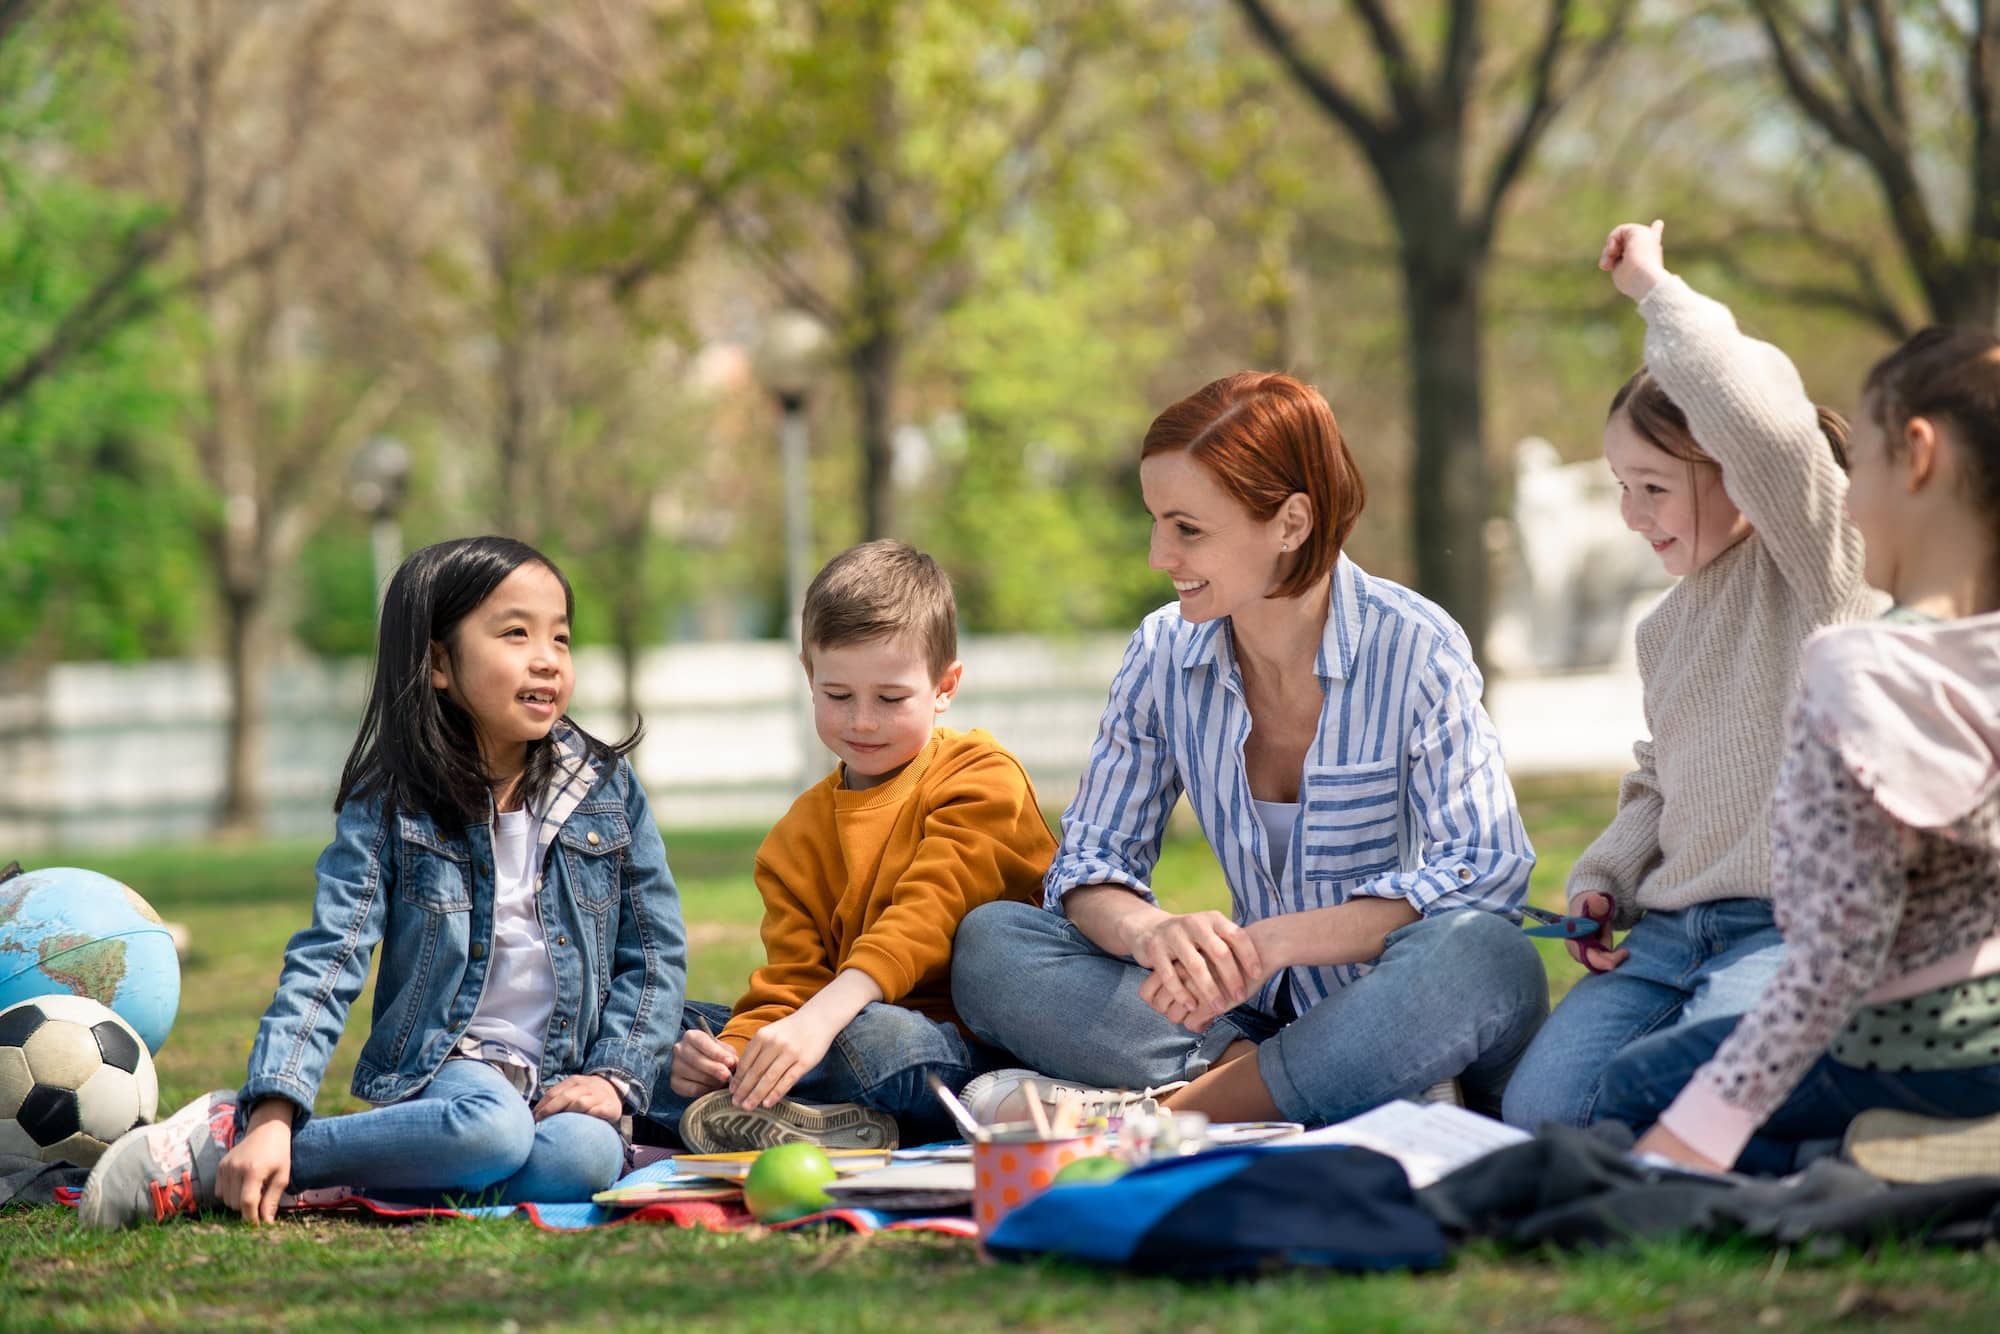 Teacher with small children sitting outdoors in city park, learning group education concept